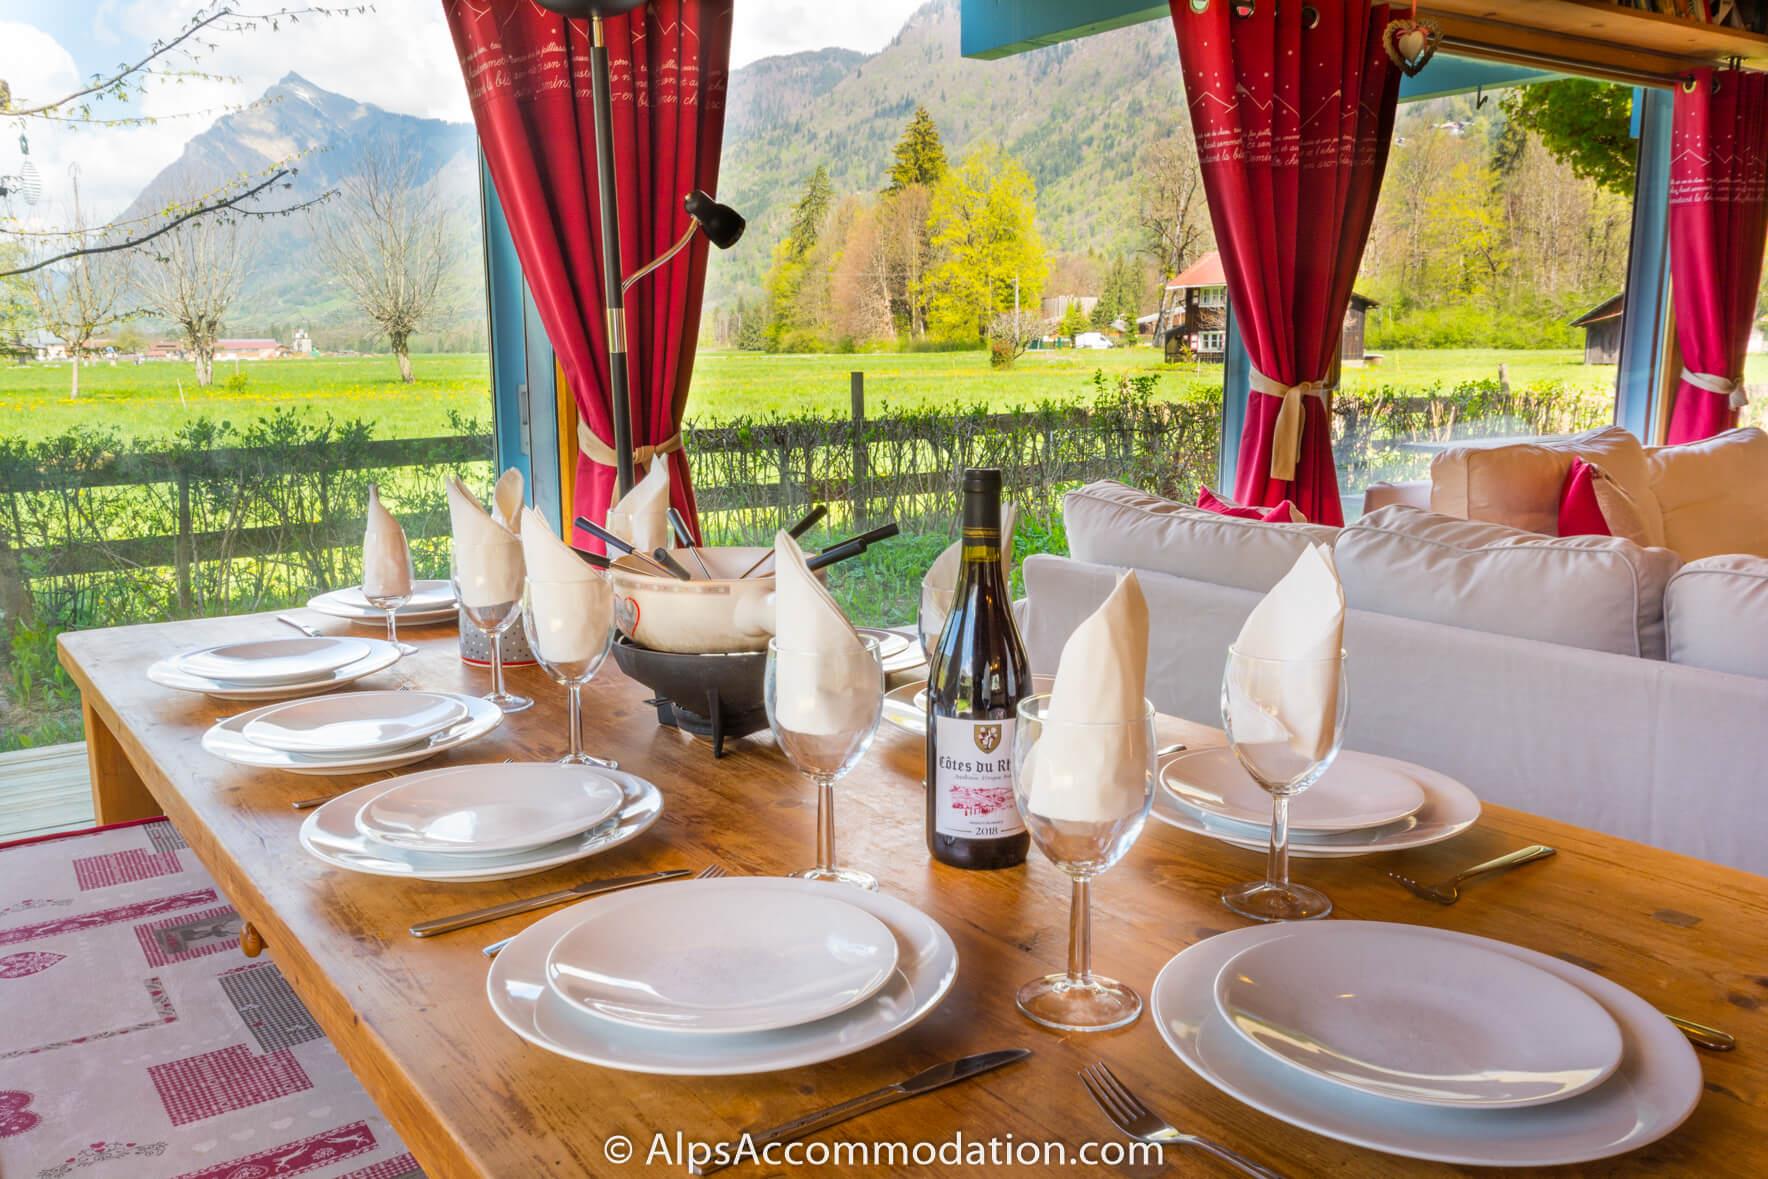 Chalet Bleu Morillon - The dining area offers truly wonderful alpine views